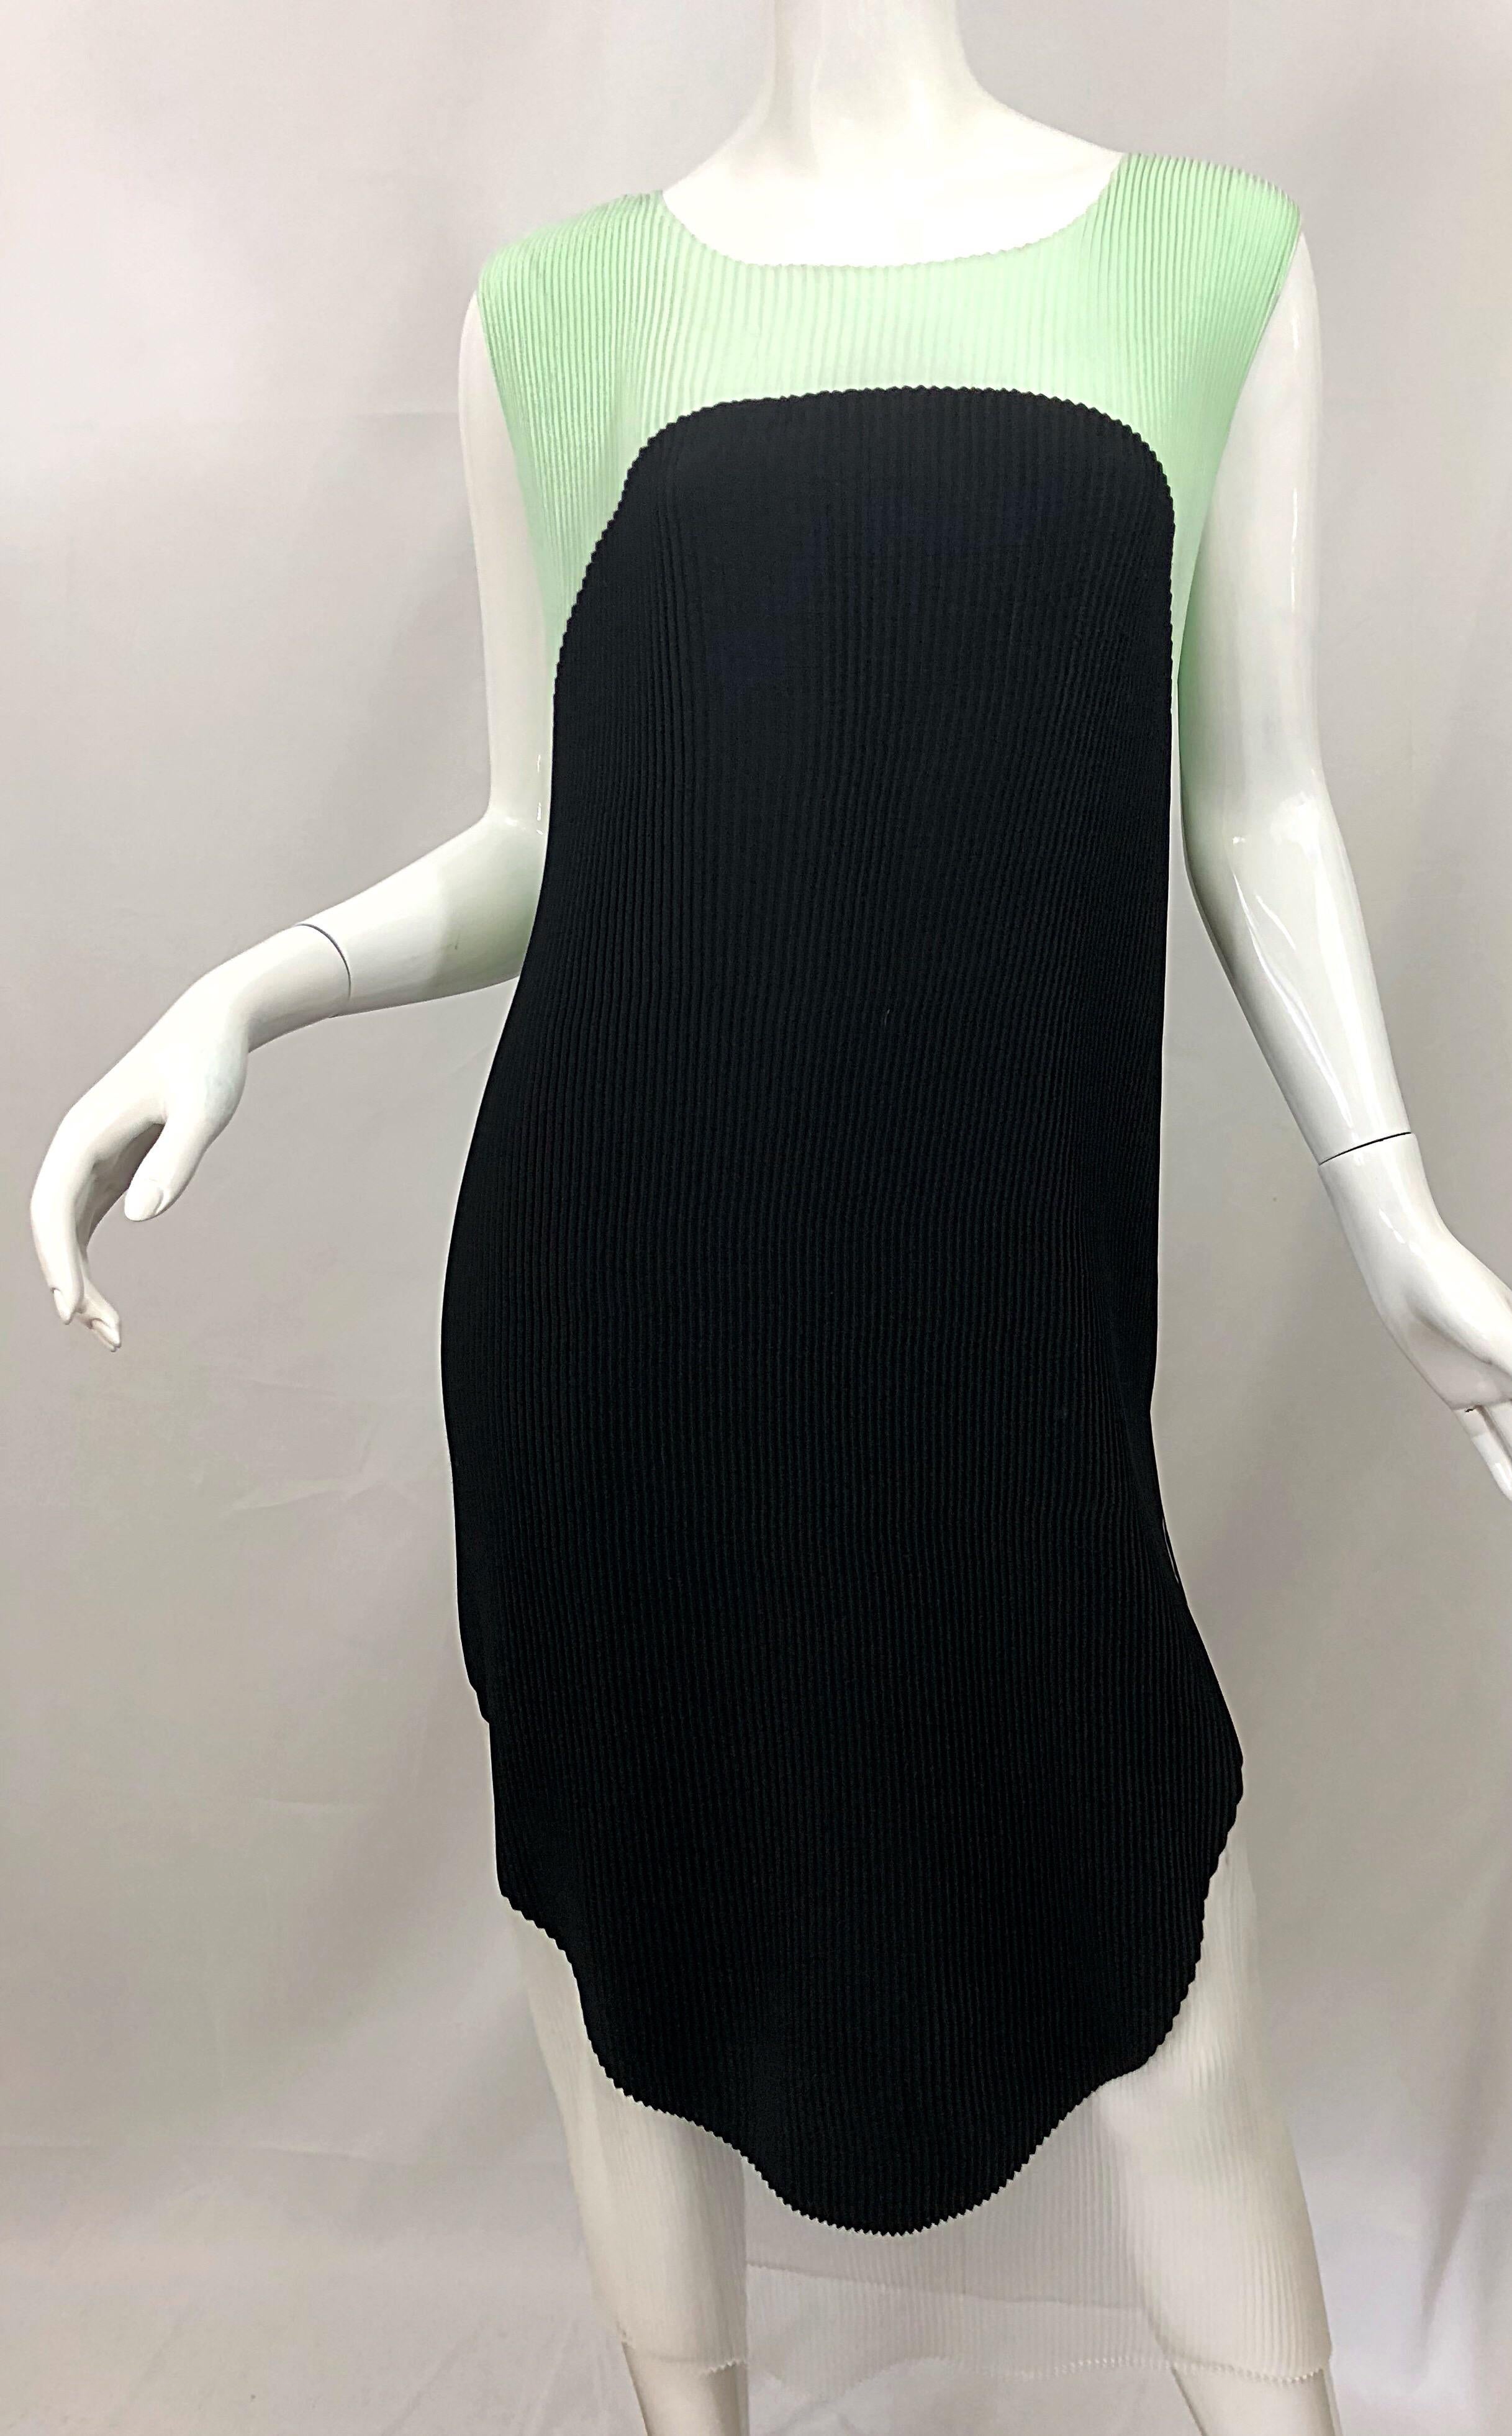 Stella McCartney Spring 2013 Runway Size 44 US 8 - 10 Color Block Pleated Dress For Sale 7